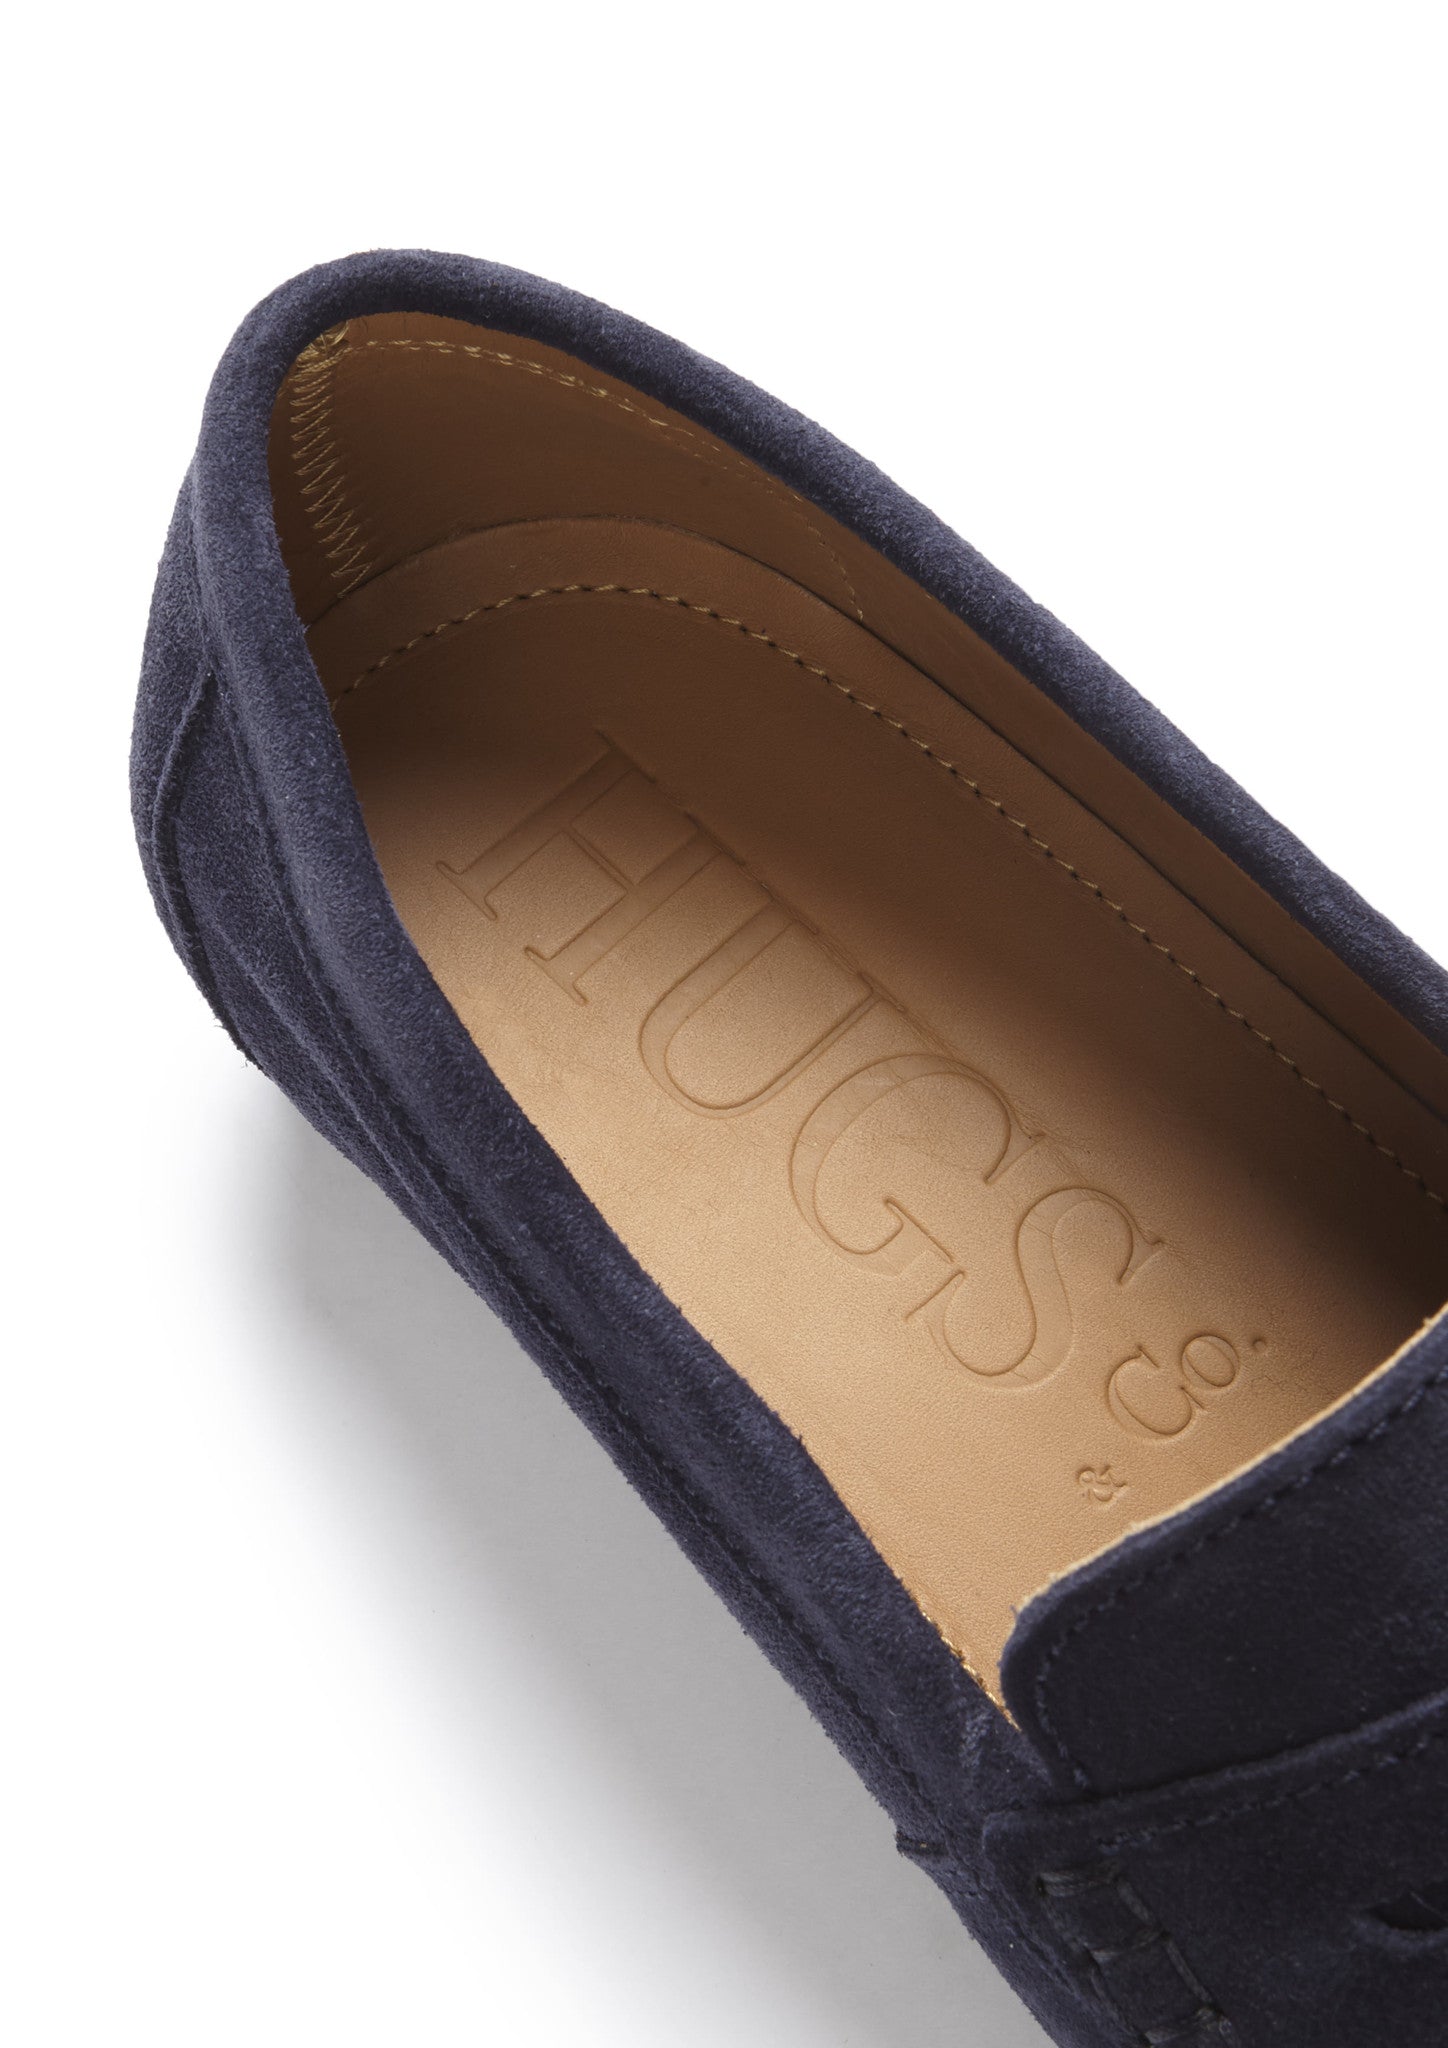 Boat Loafers, navy blue suede